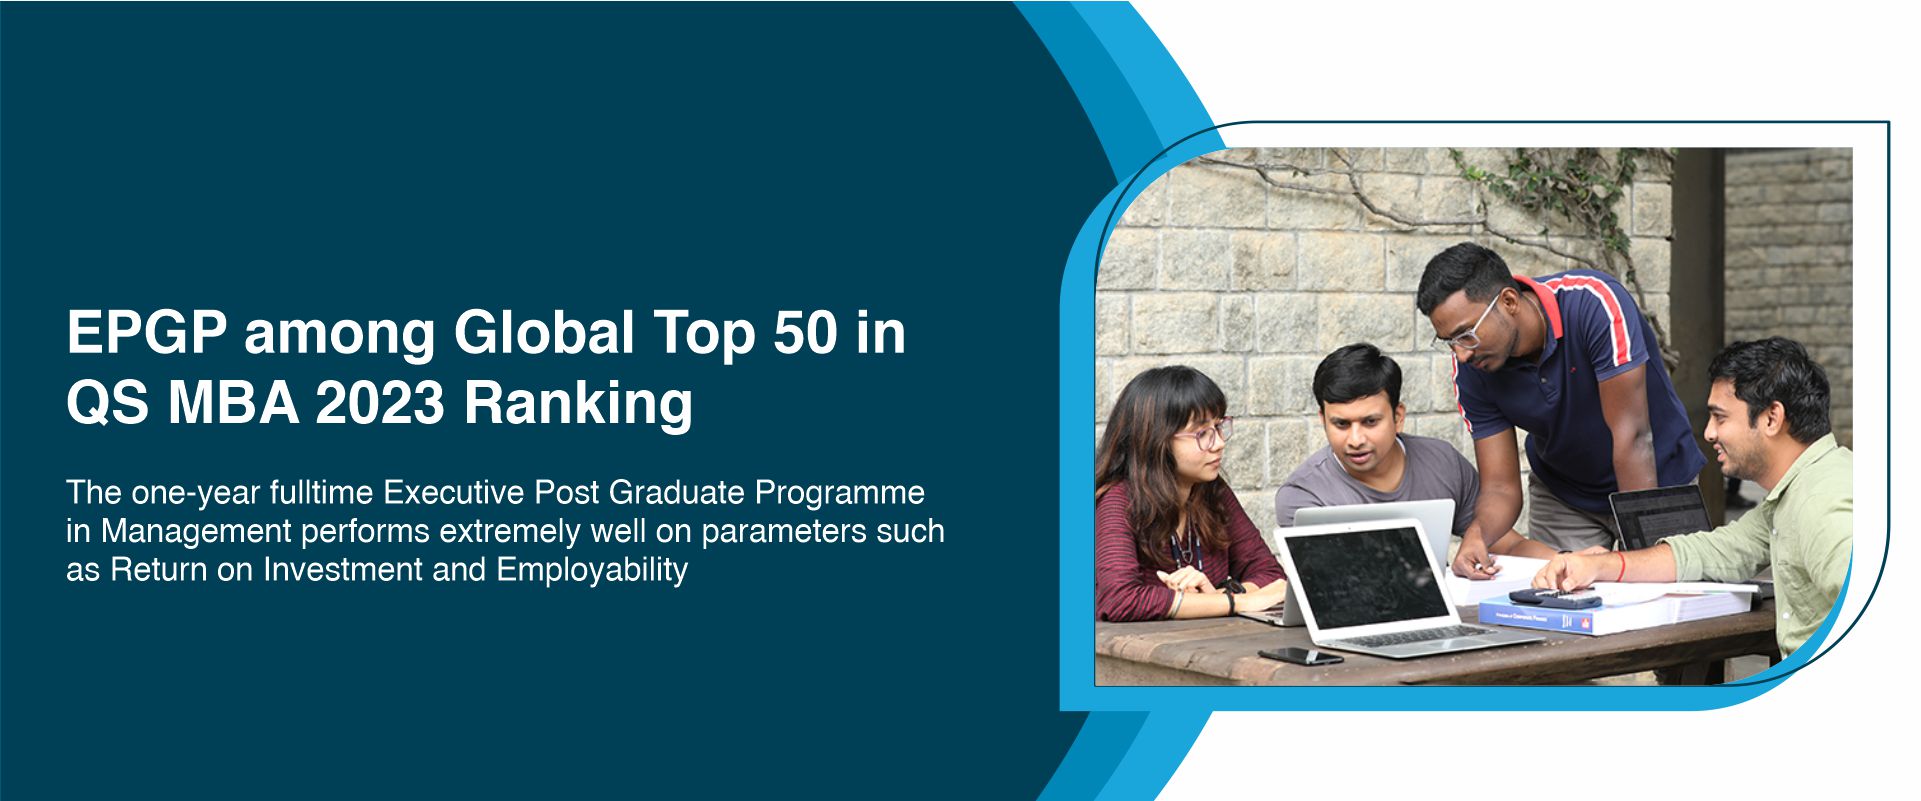 EPGP among Global Top 50 in QS MBA 2023 Ranking